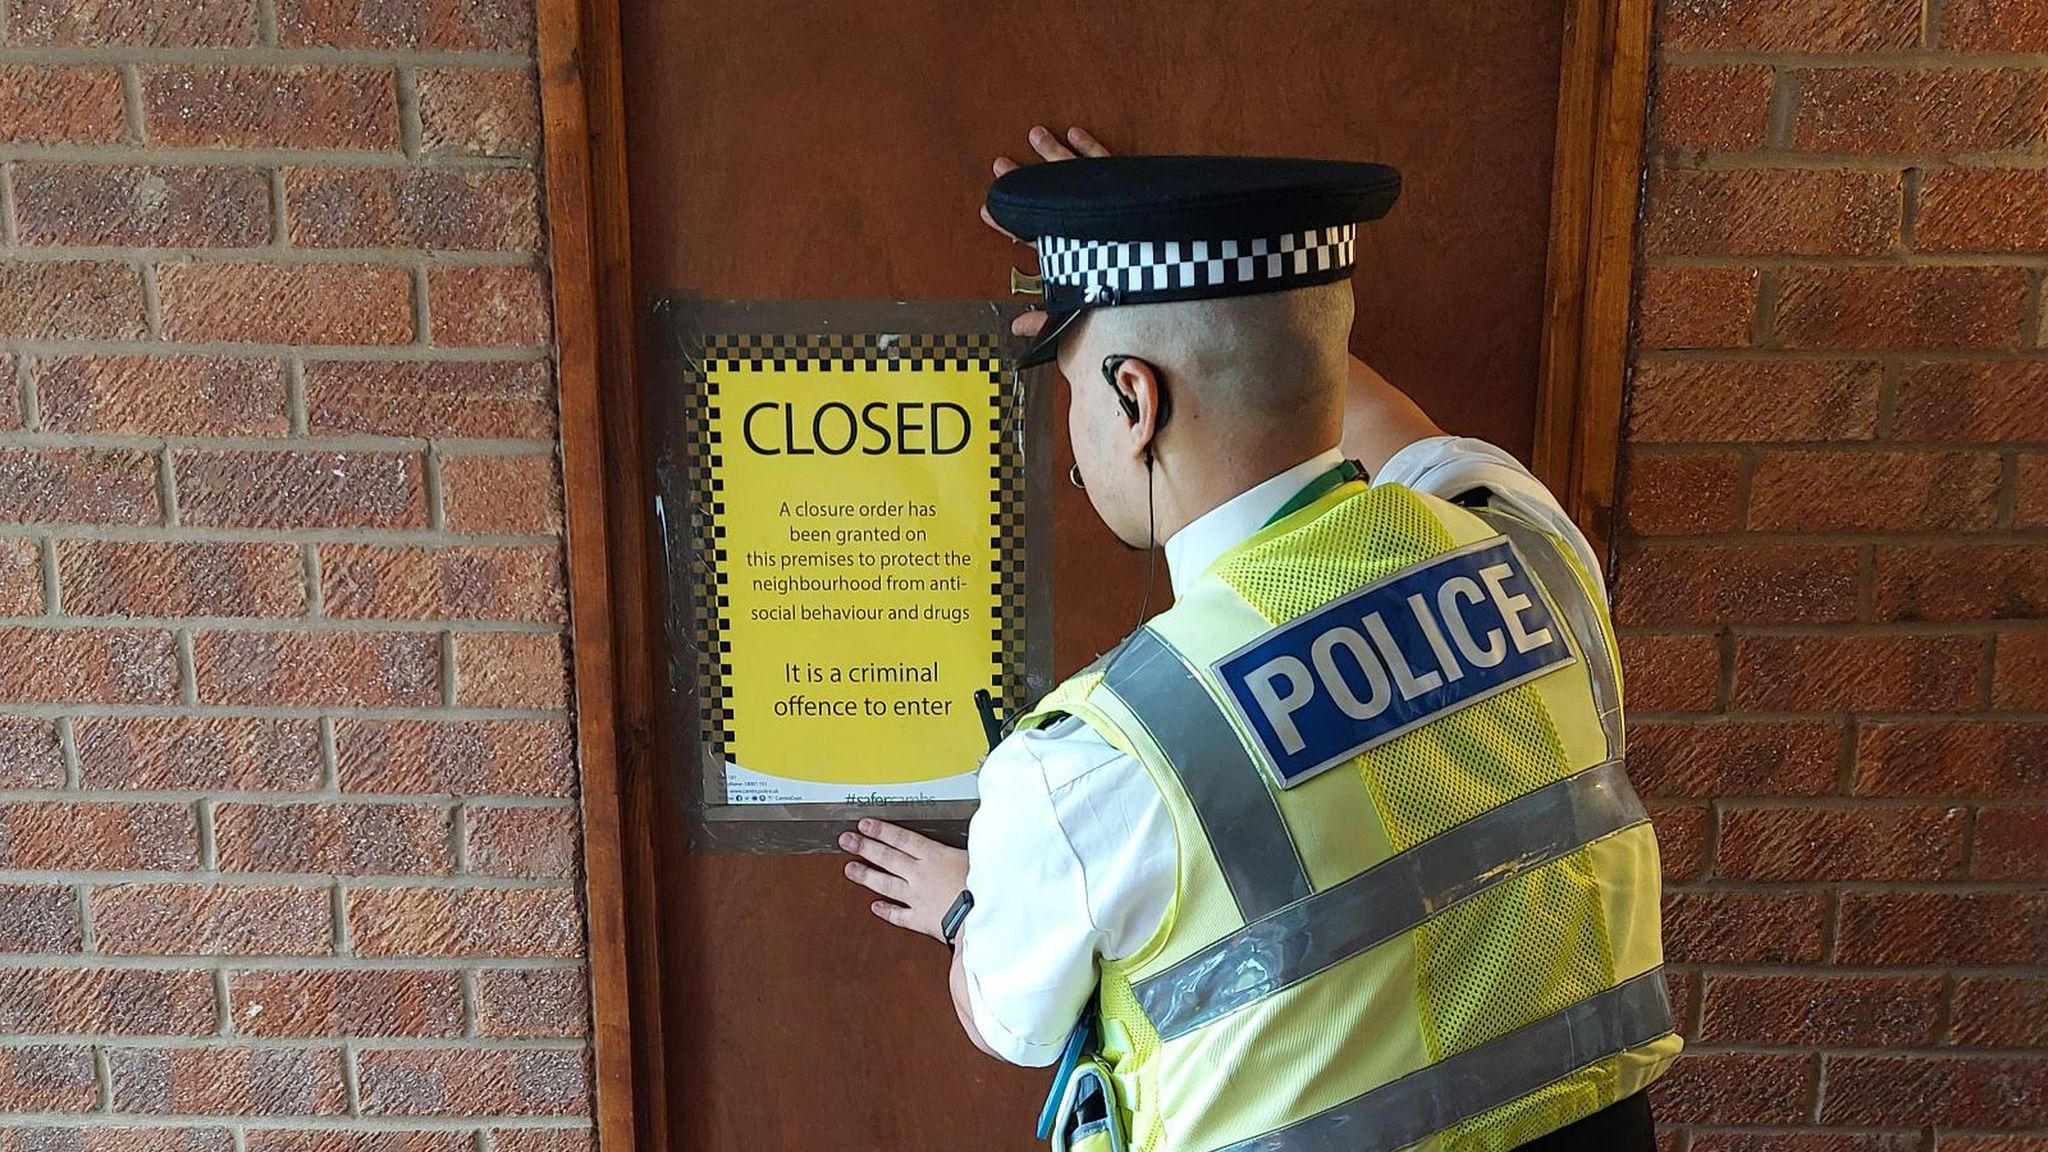 Police officer putting a sign on a door